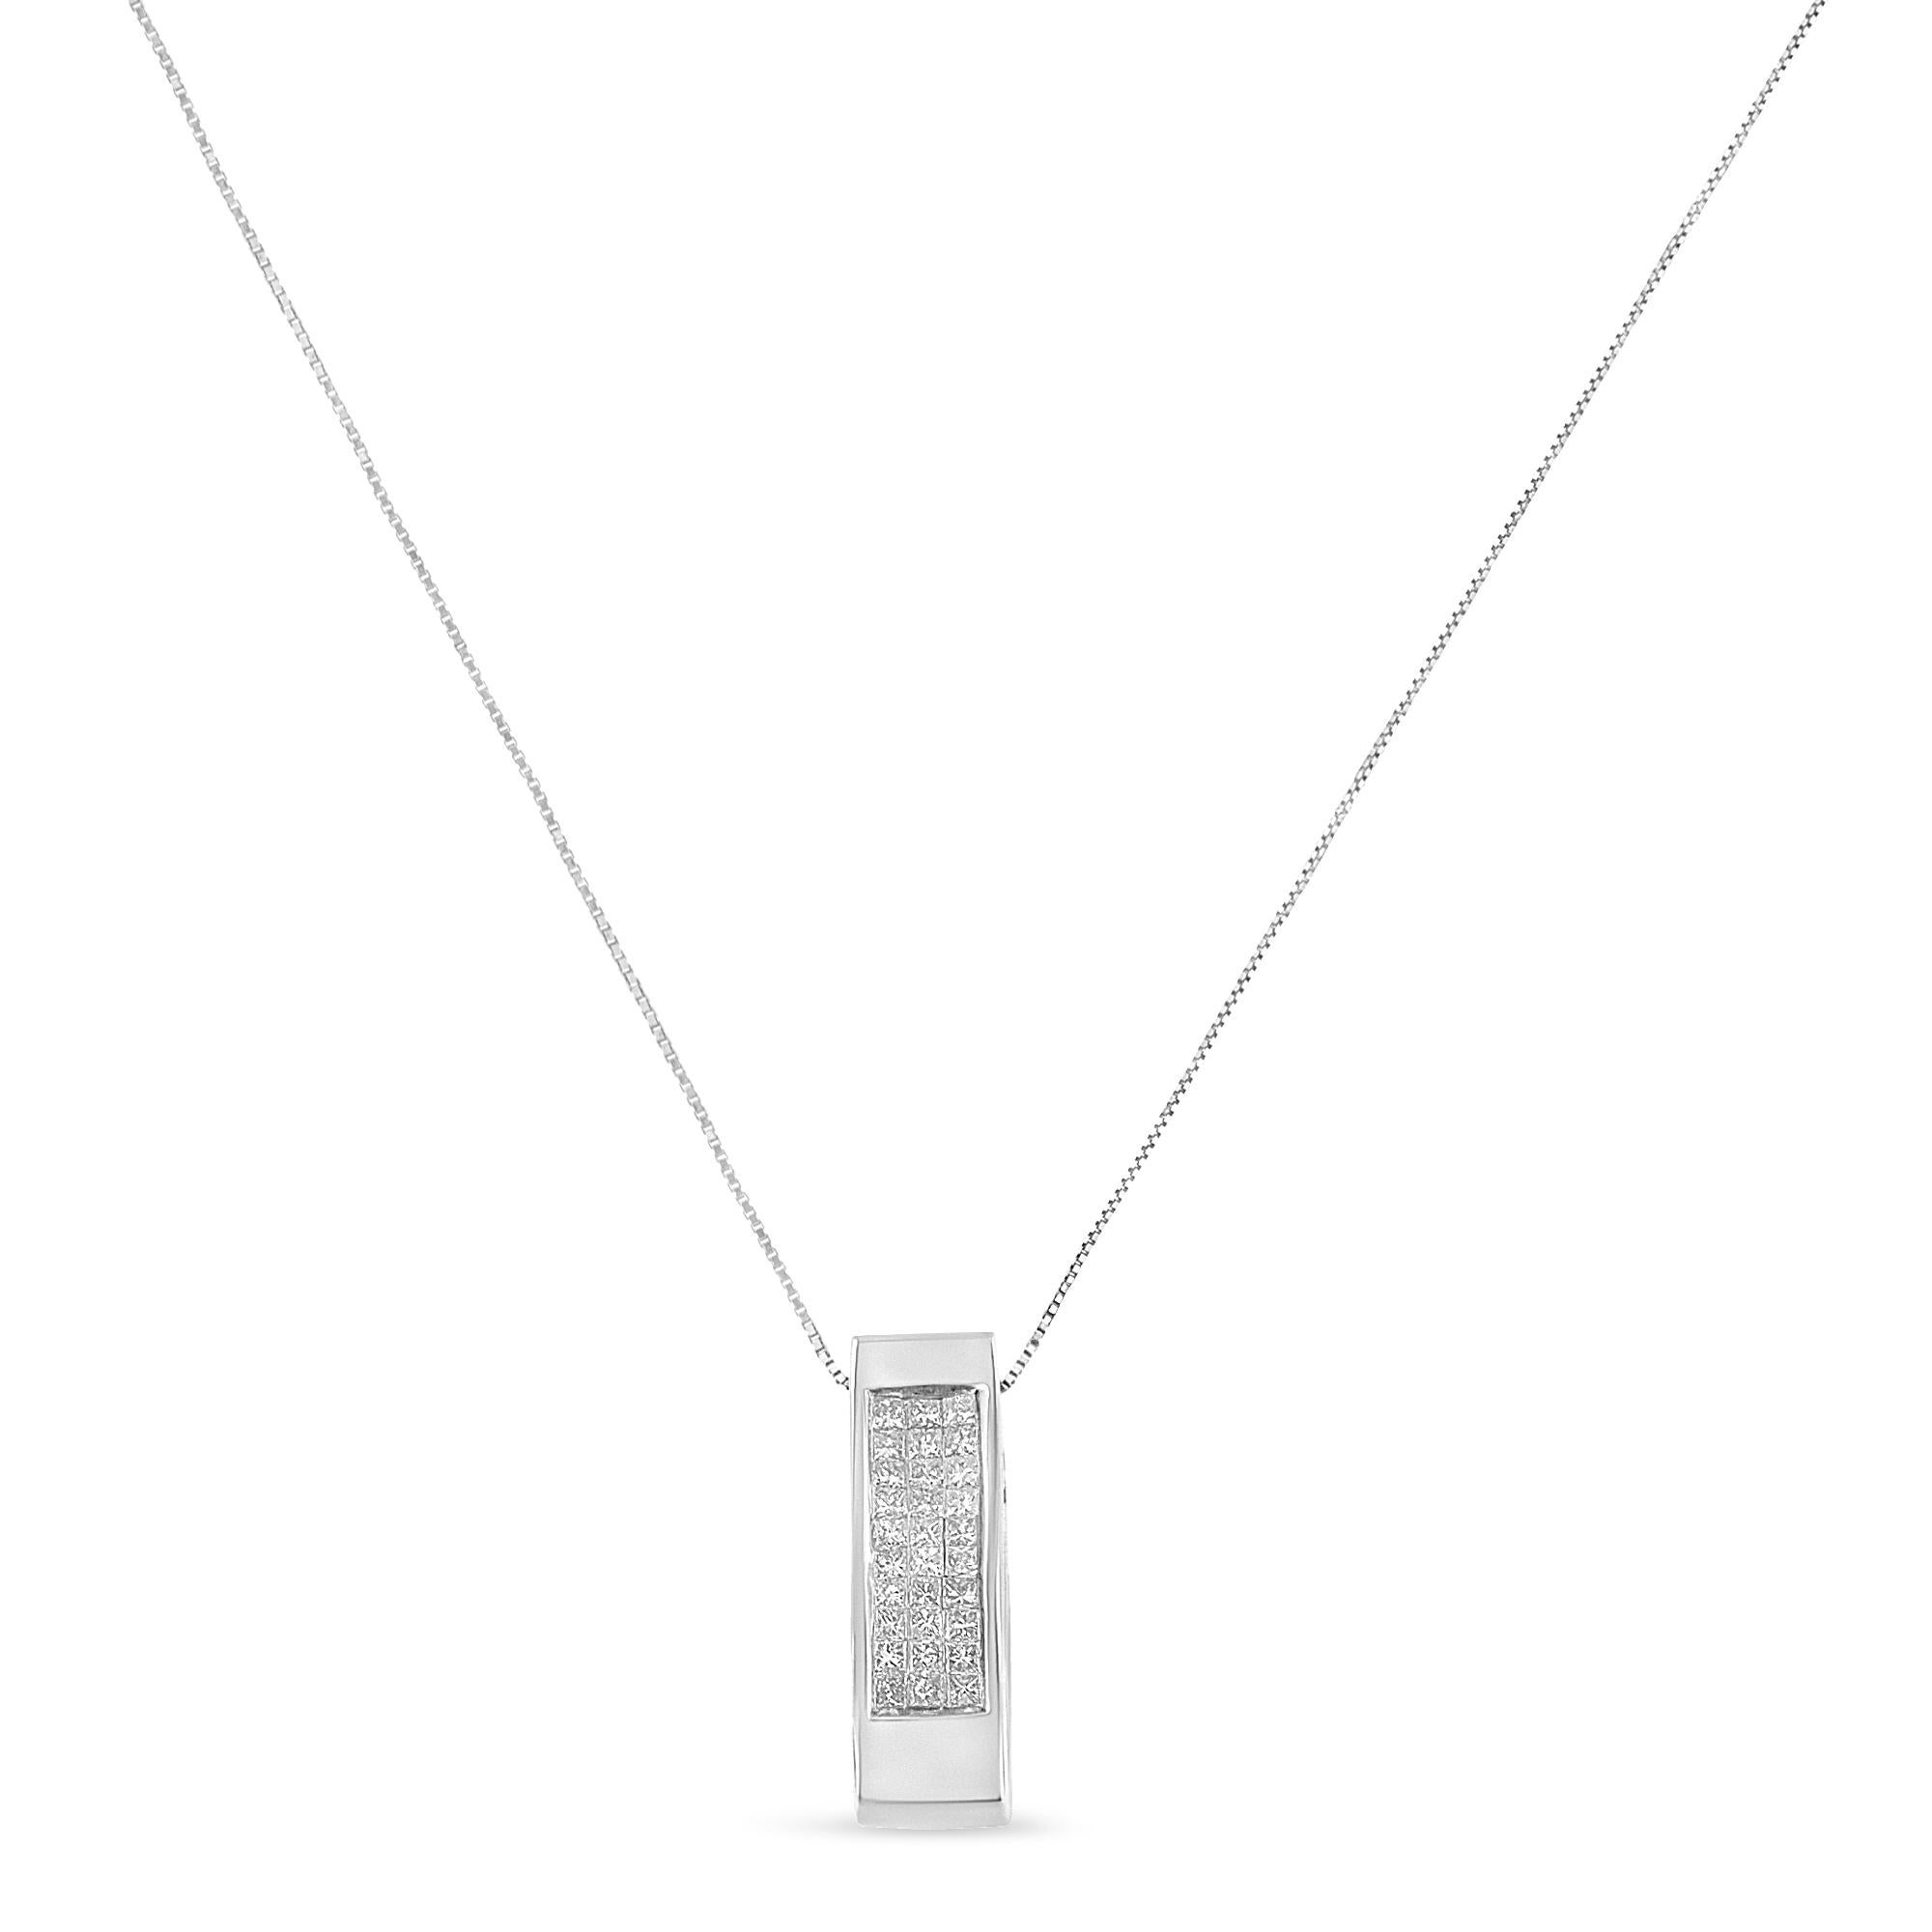 Created in a modern, contemporary design, this diamond vertical bar block pendant necklace radiates class and glamour. The minimalist bar block profile is juxtaposed by glamorous, linear princess cut diamonds in an invisible setting that perfectly